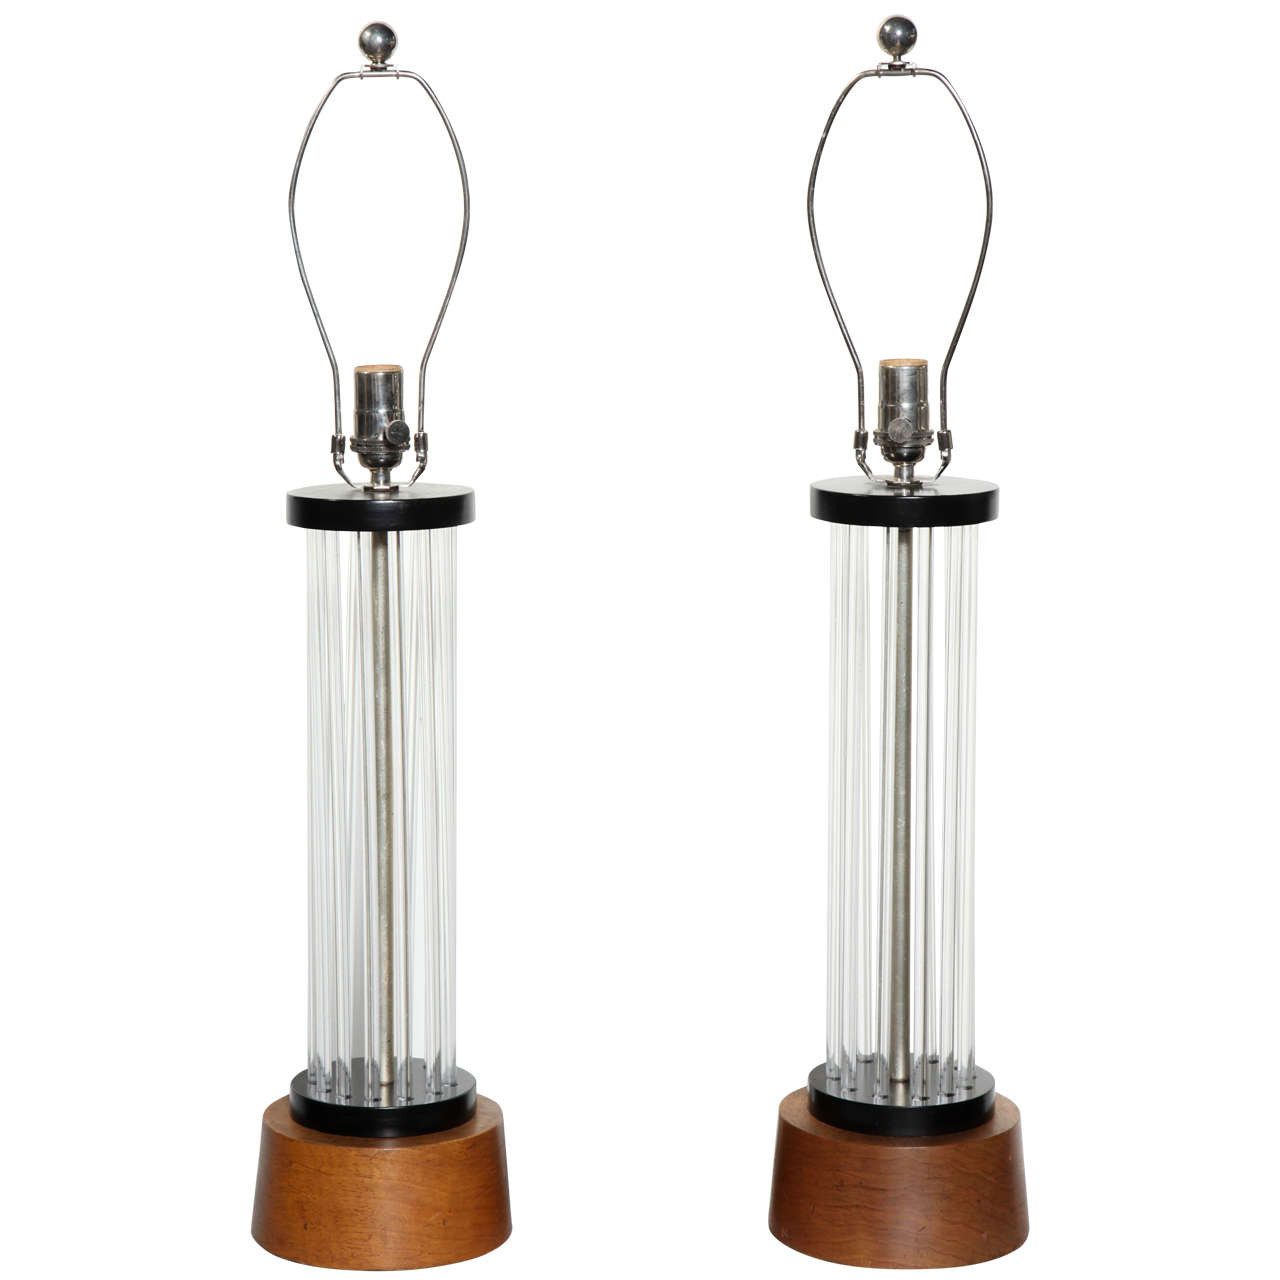 Pair of Walnut & Black Enamel Column Table Lamps with 13 Clear Lucite Rods